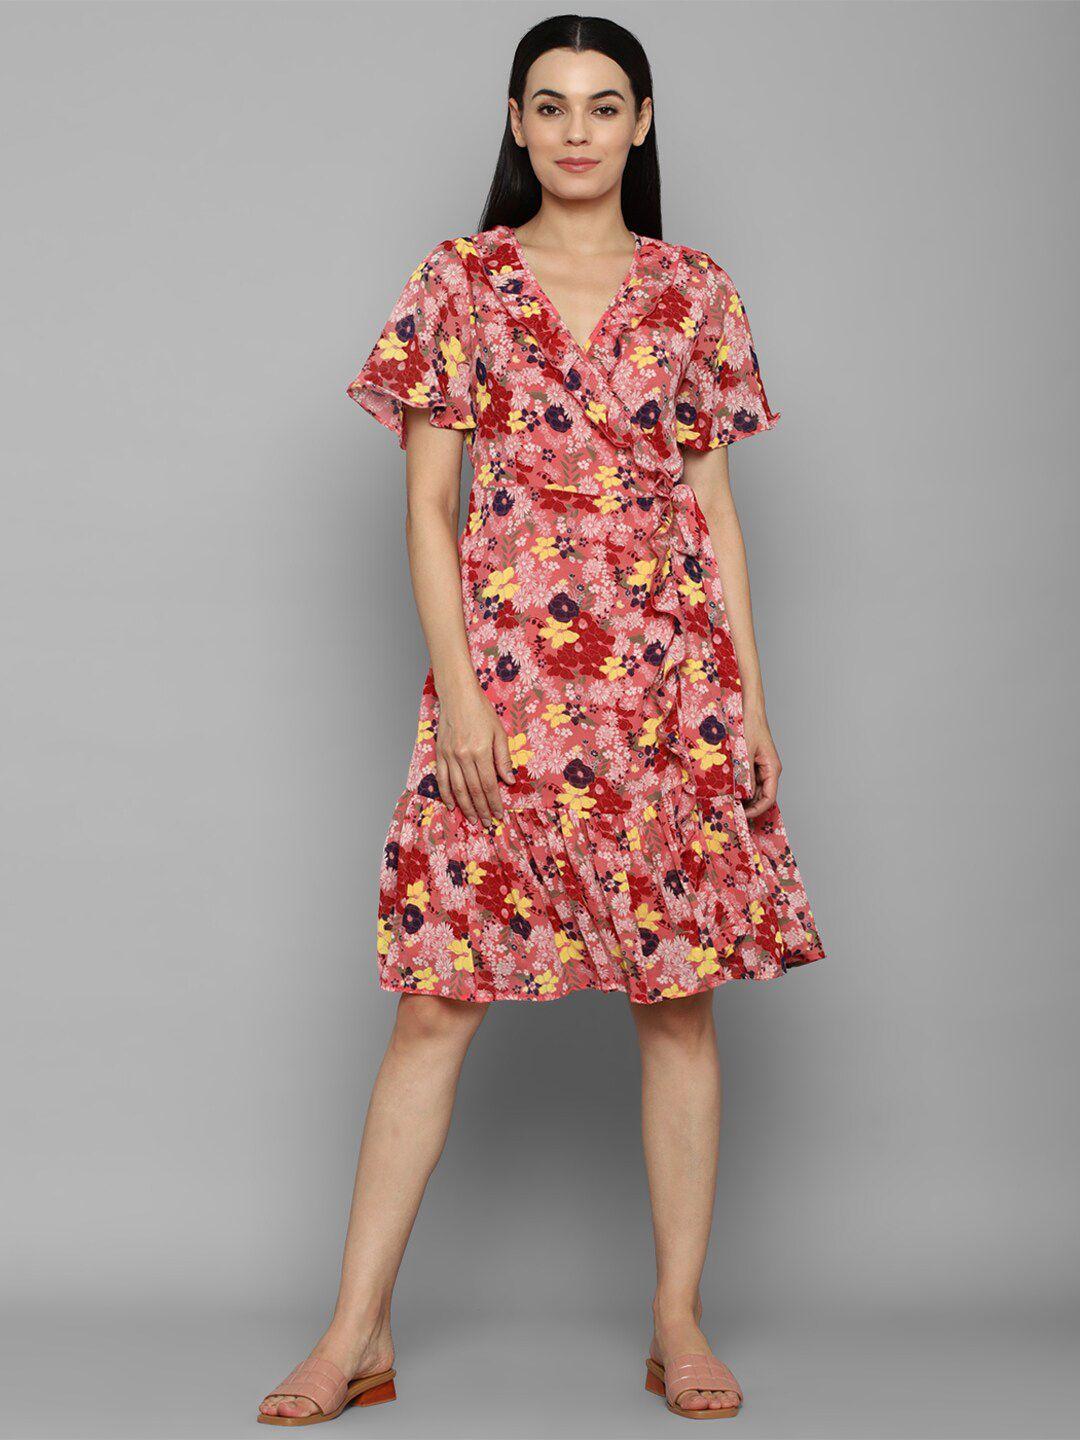 allen solly woman pink floral dress